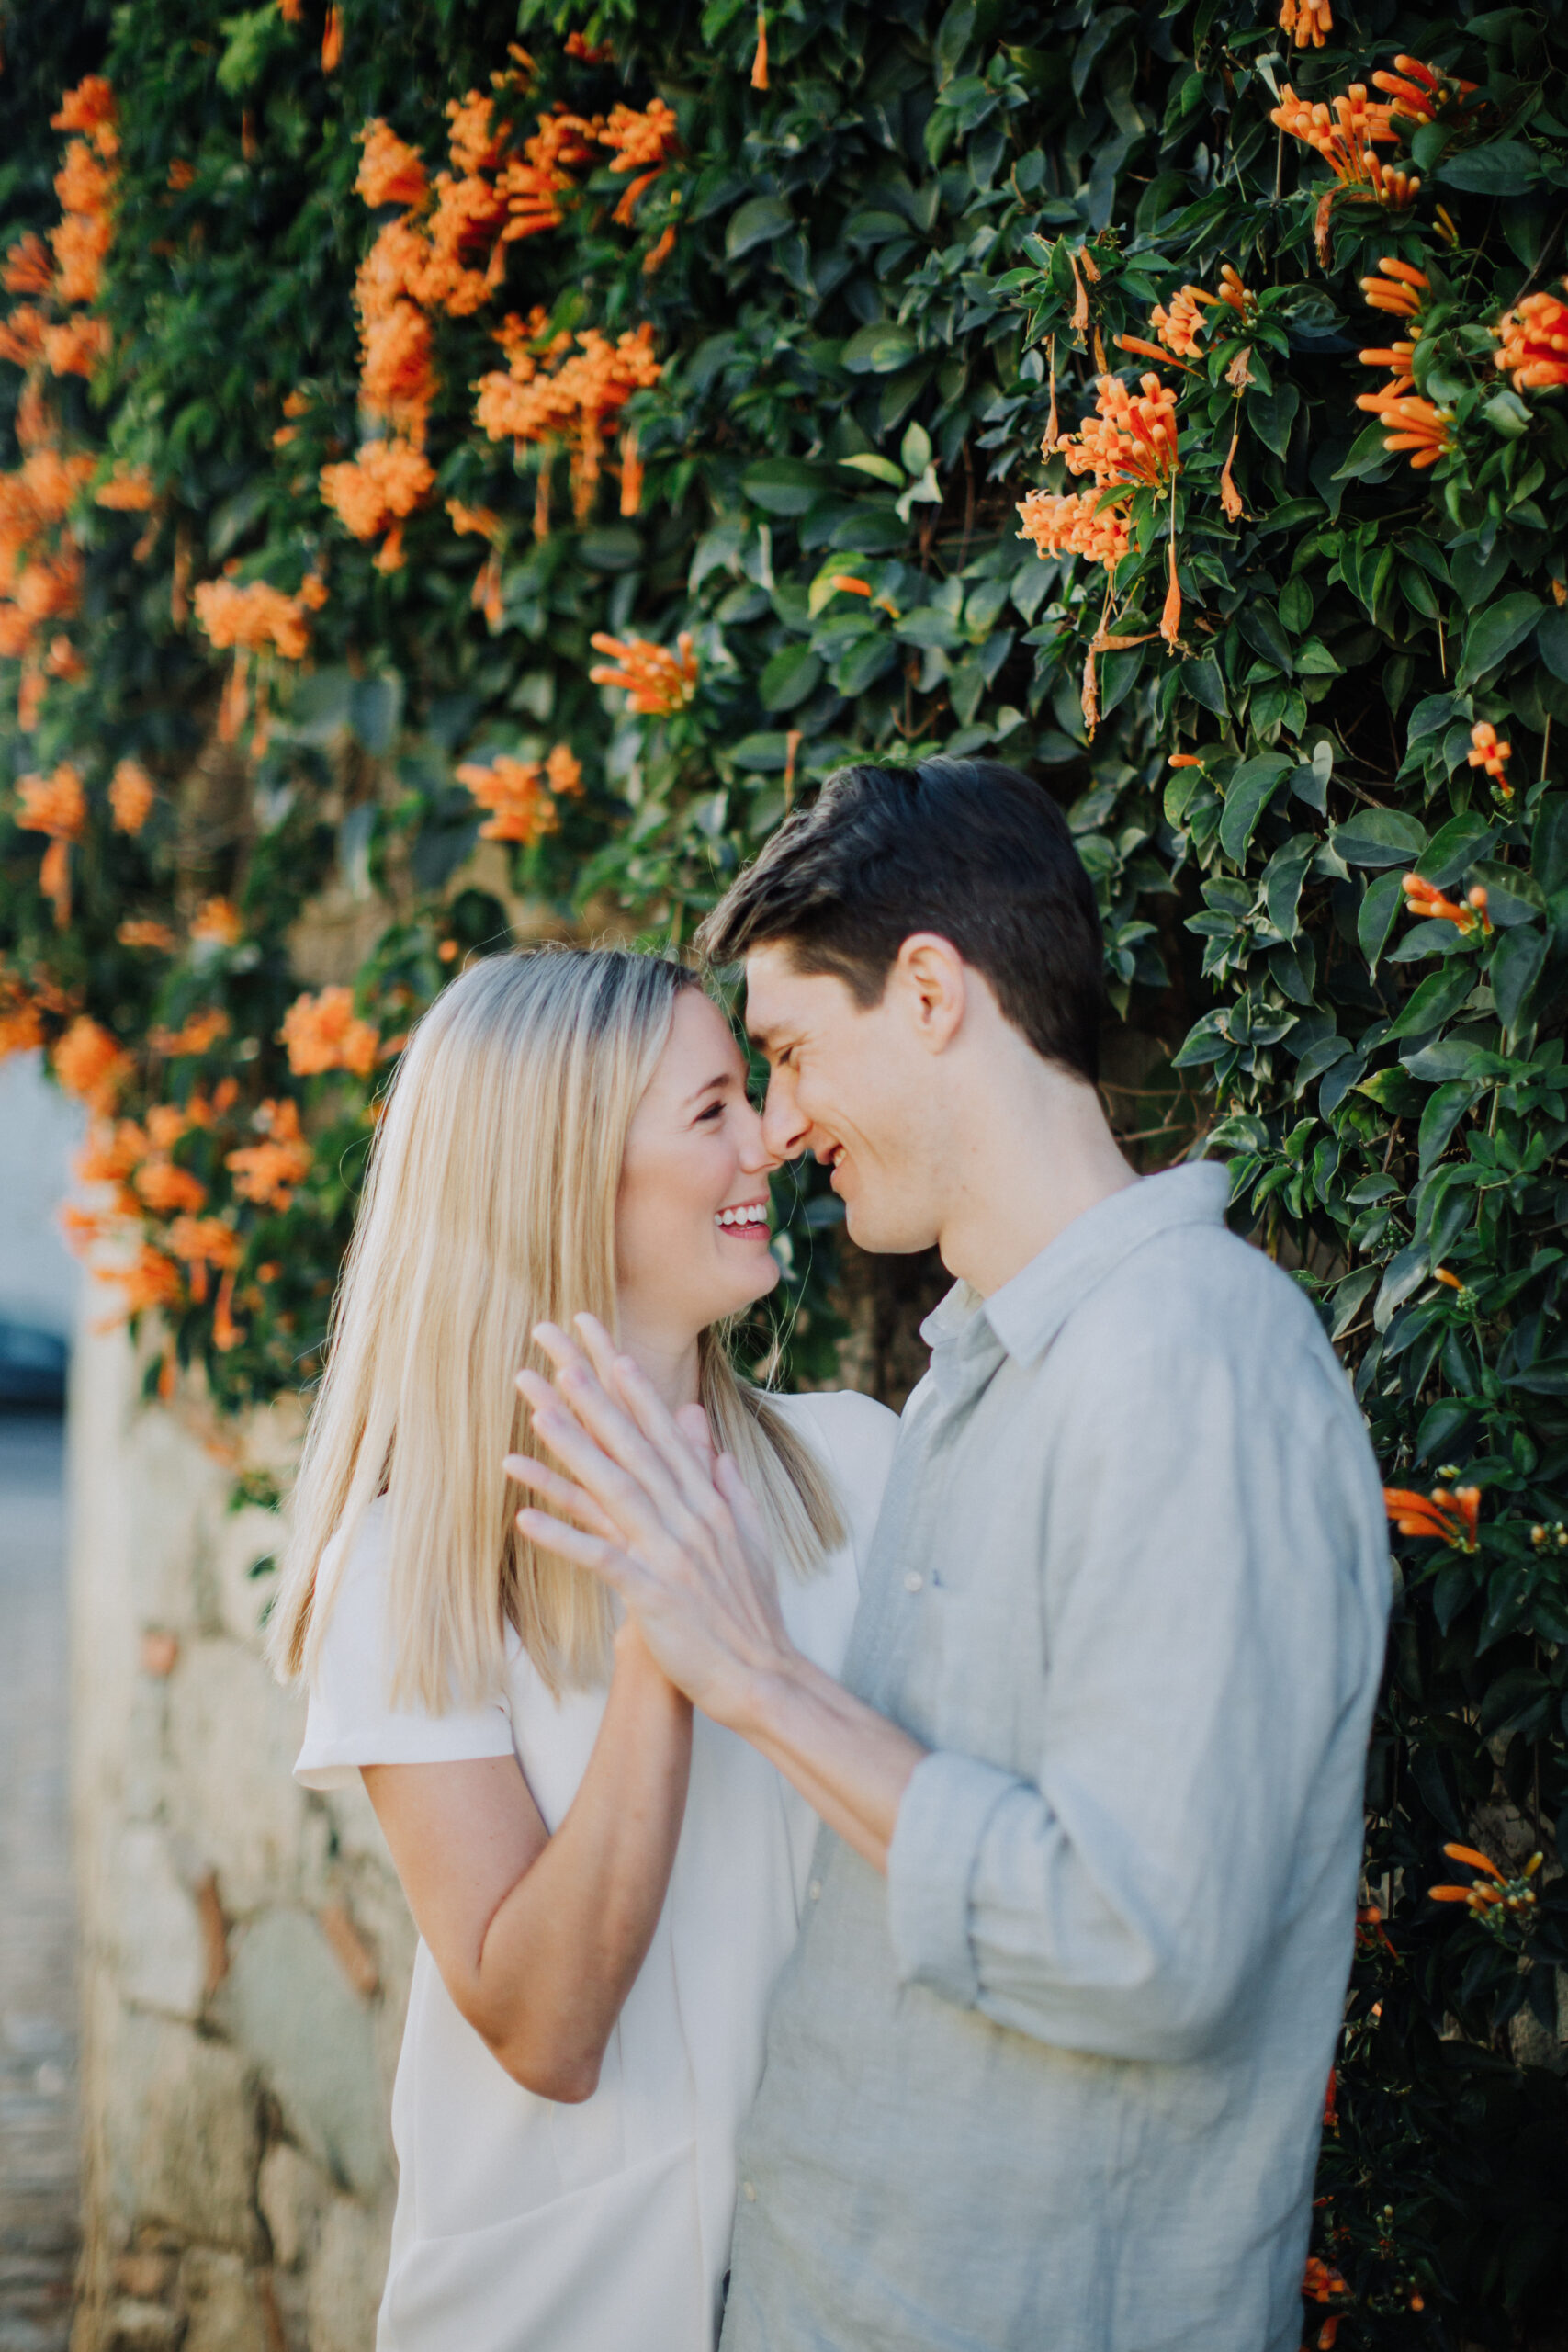 beautiful couple pose in front of stunning orange flowers